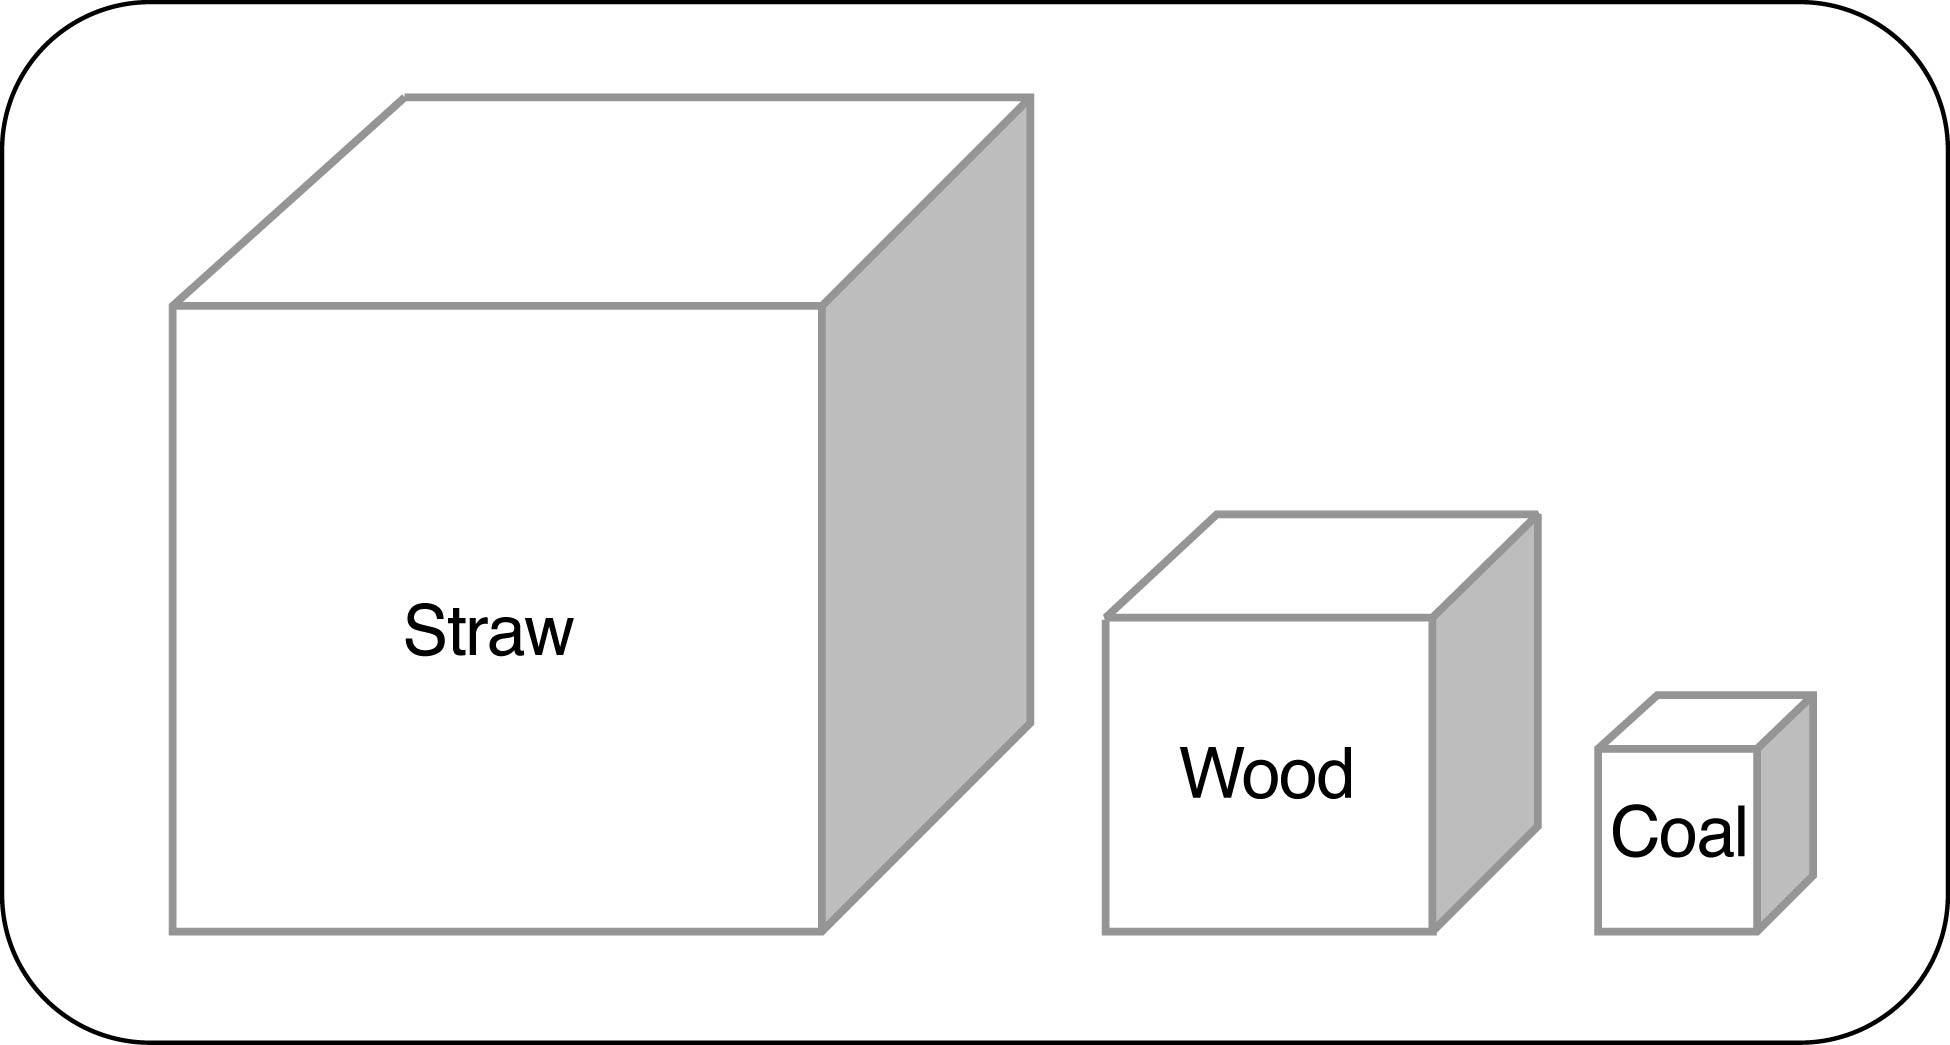 A drawing of three boxes, the largest with the word straw written across the centre, followed by a smaller middle box with the word wood written across the centre and a small box with the word coal written across the centre. The diagram shows the equivalent energy content by volume of unprocessed materials.